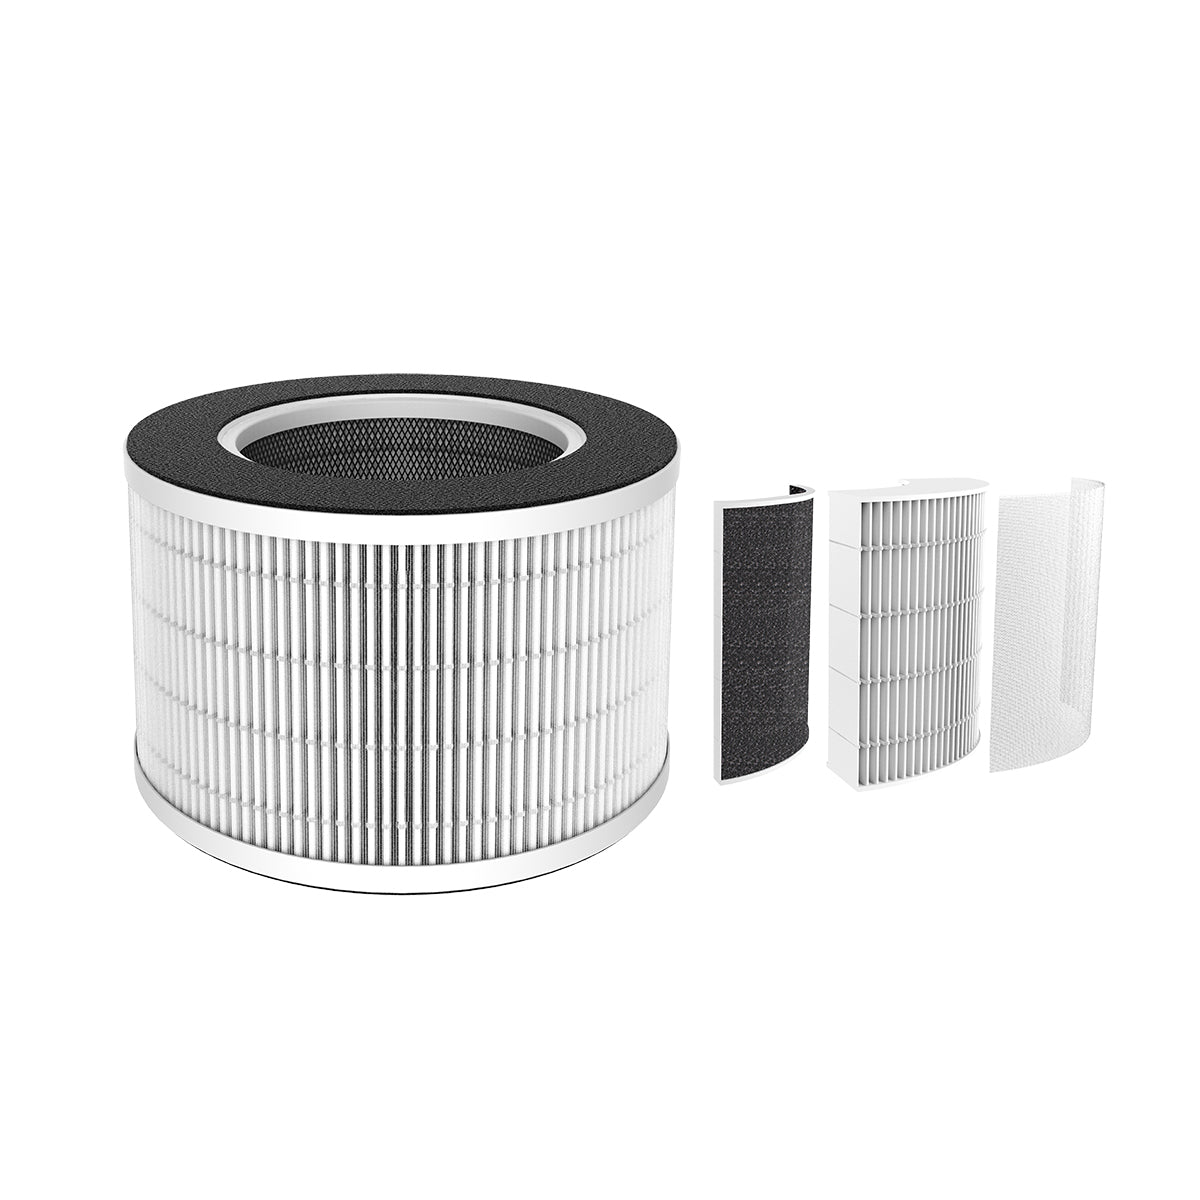 Image showing the layers of the Air Purifier HEPA Filter.